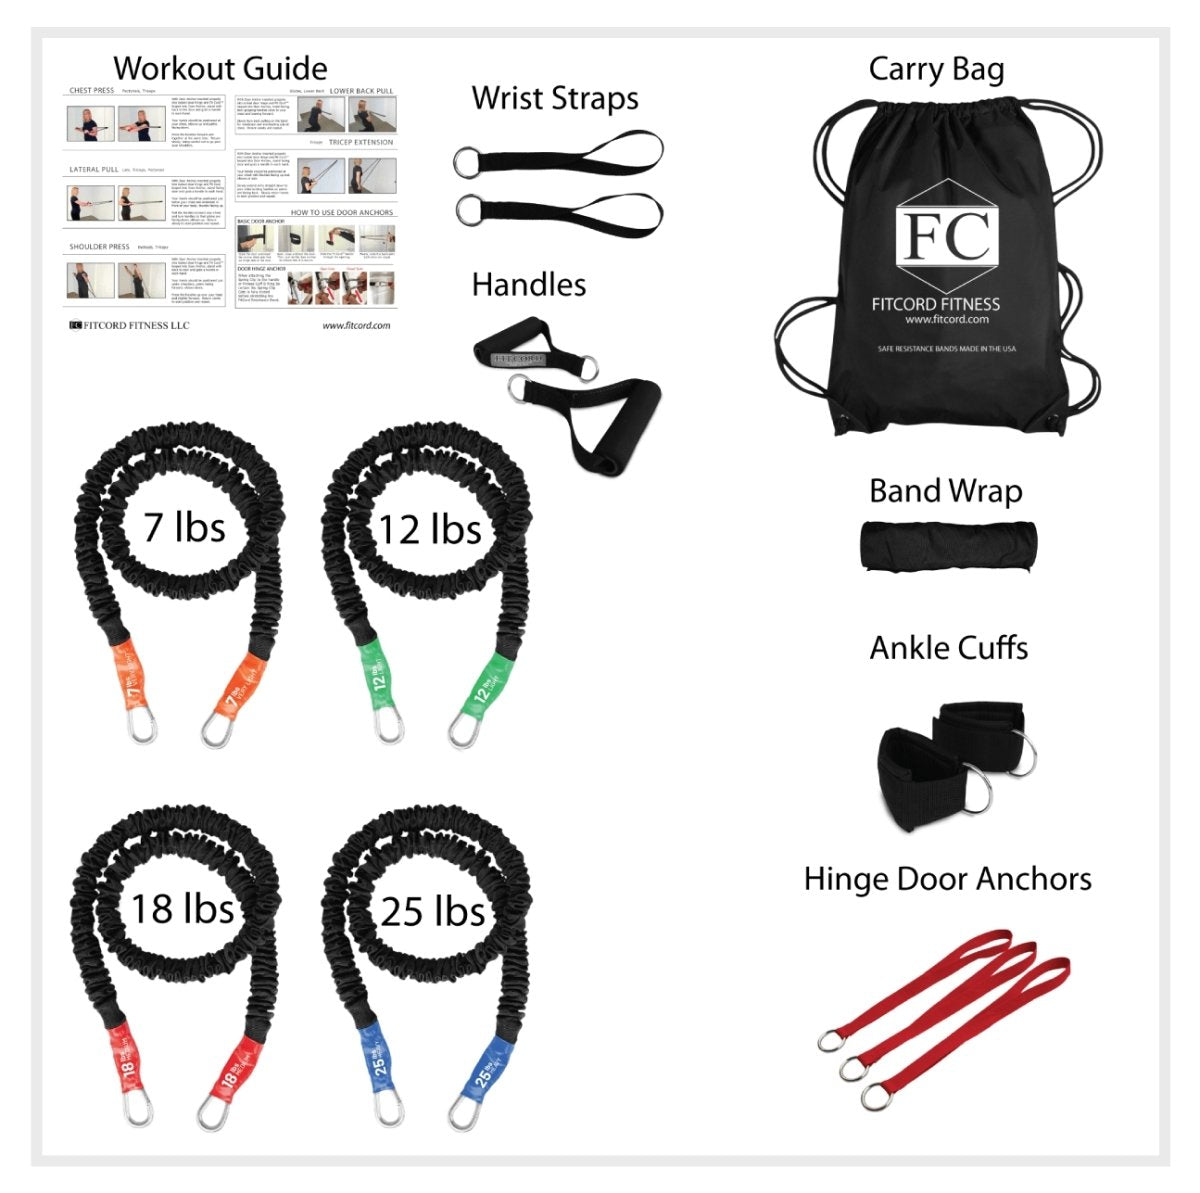 American Made resistance band Home gym. Includes  Very Light 7lb, 12lb Light, 18lb Medium and 25lb Heavy Covered Resistance Bands with clips for stacking. Also comes with Carry Bag, Handles, Cuffs, Straps and Anchors PLUS a Band Wrap to keep stacked bands together when in use.  Last for years, sturdy, safe and versatile. 